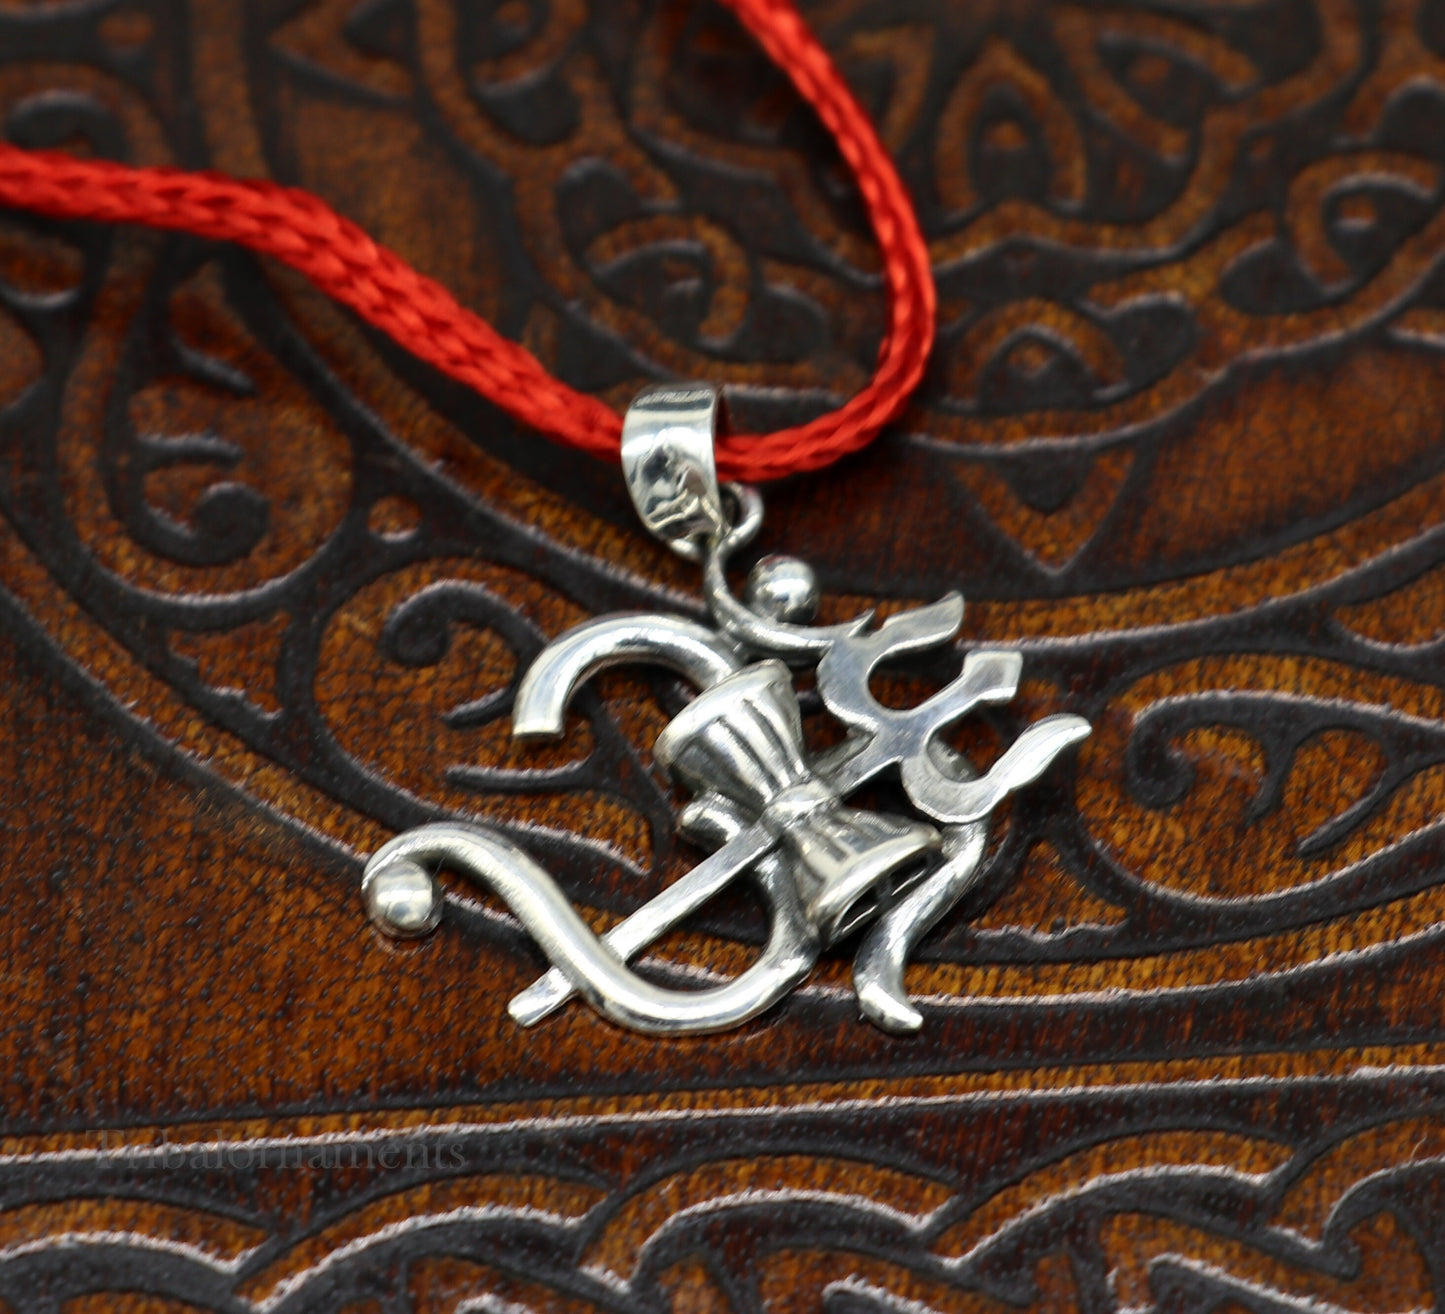 925 sterling silver vintage antique style Aum with trident shiva Pendant, amazing design stunning pendant unisex gifting jewelry ssp964 - TRIBAL ORNAMENTS